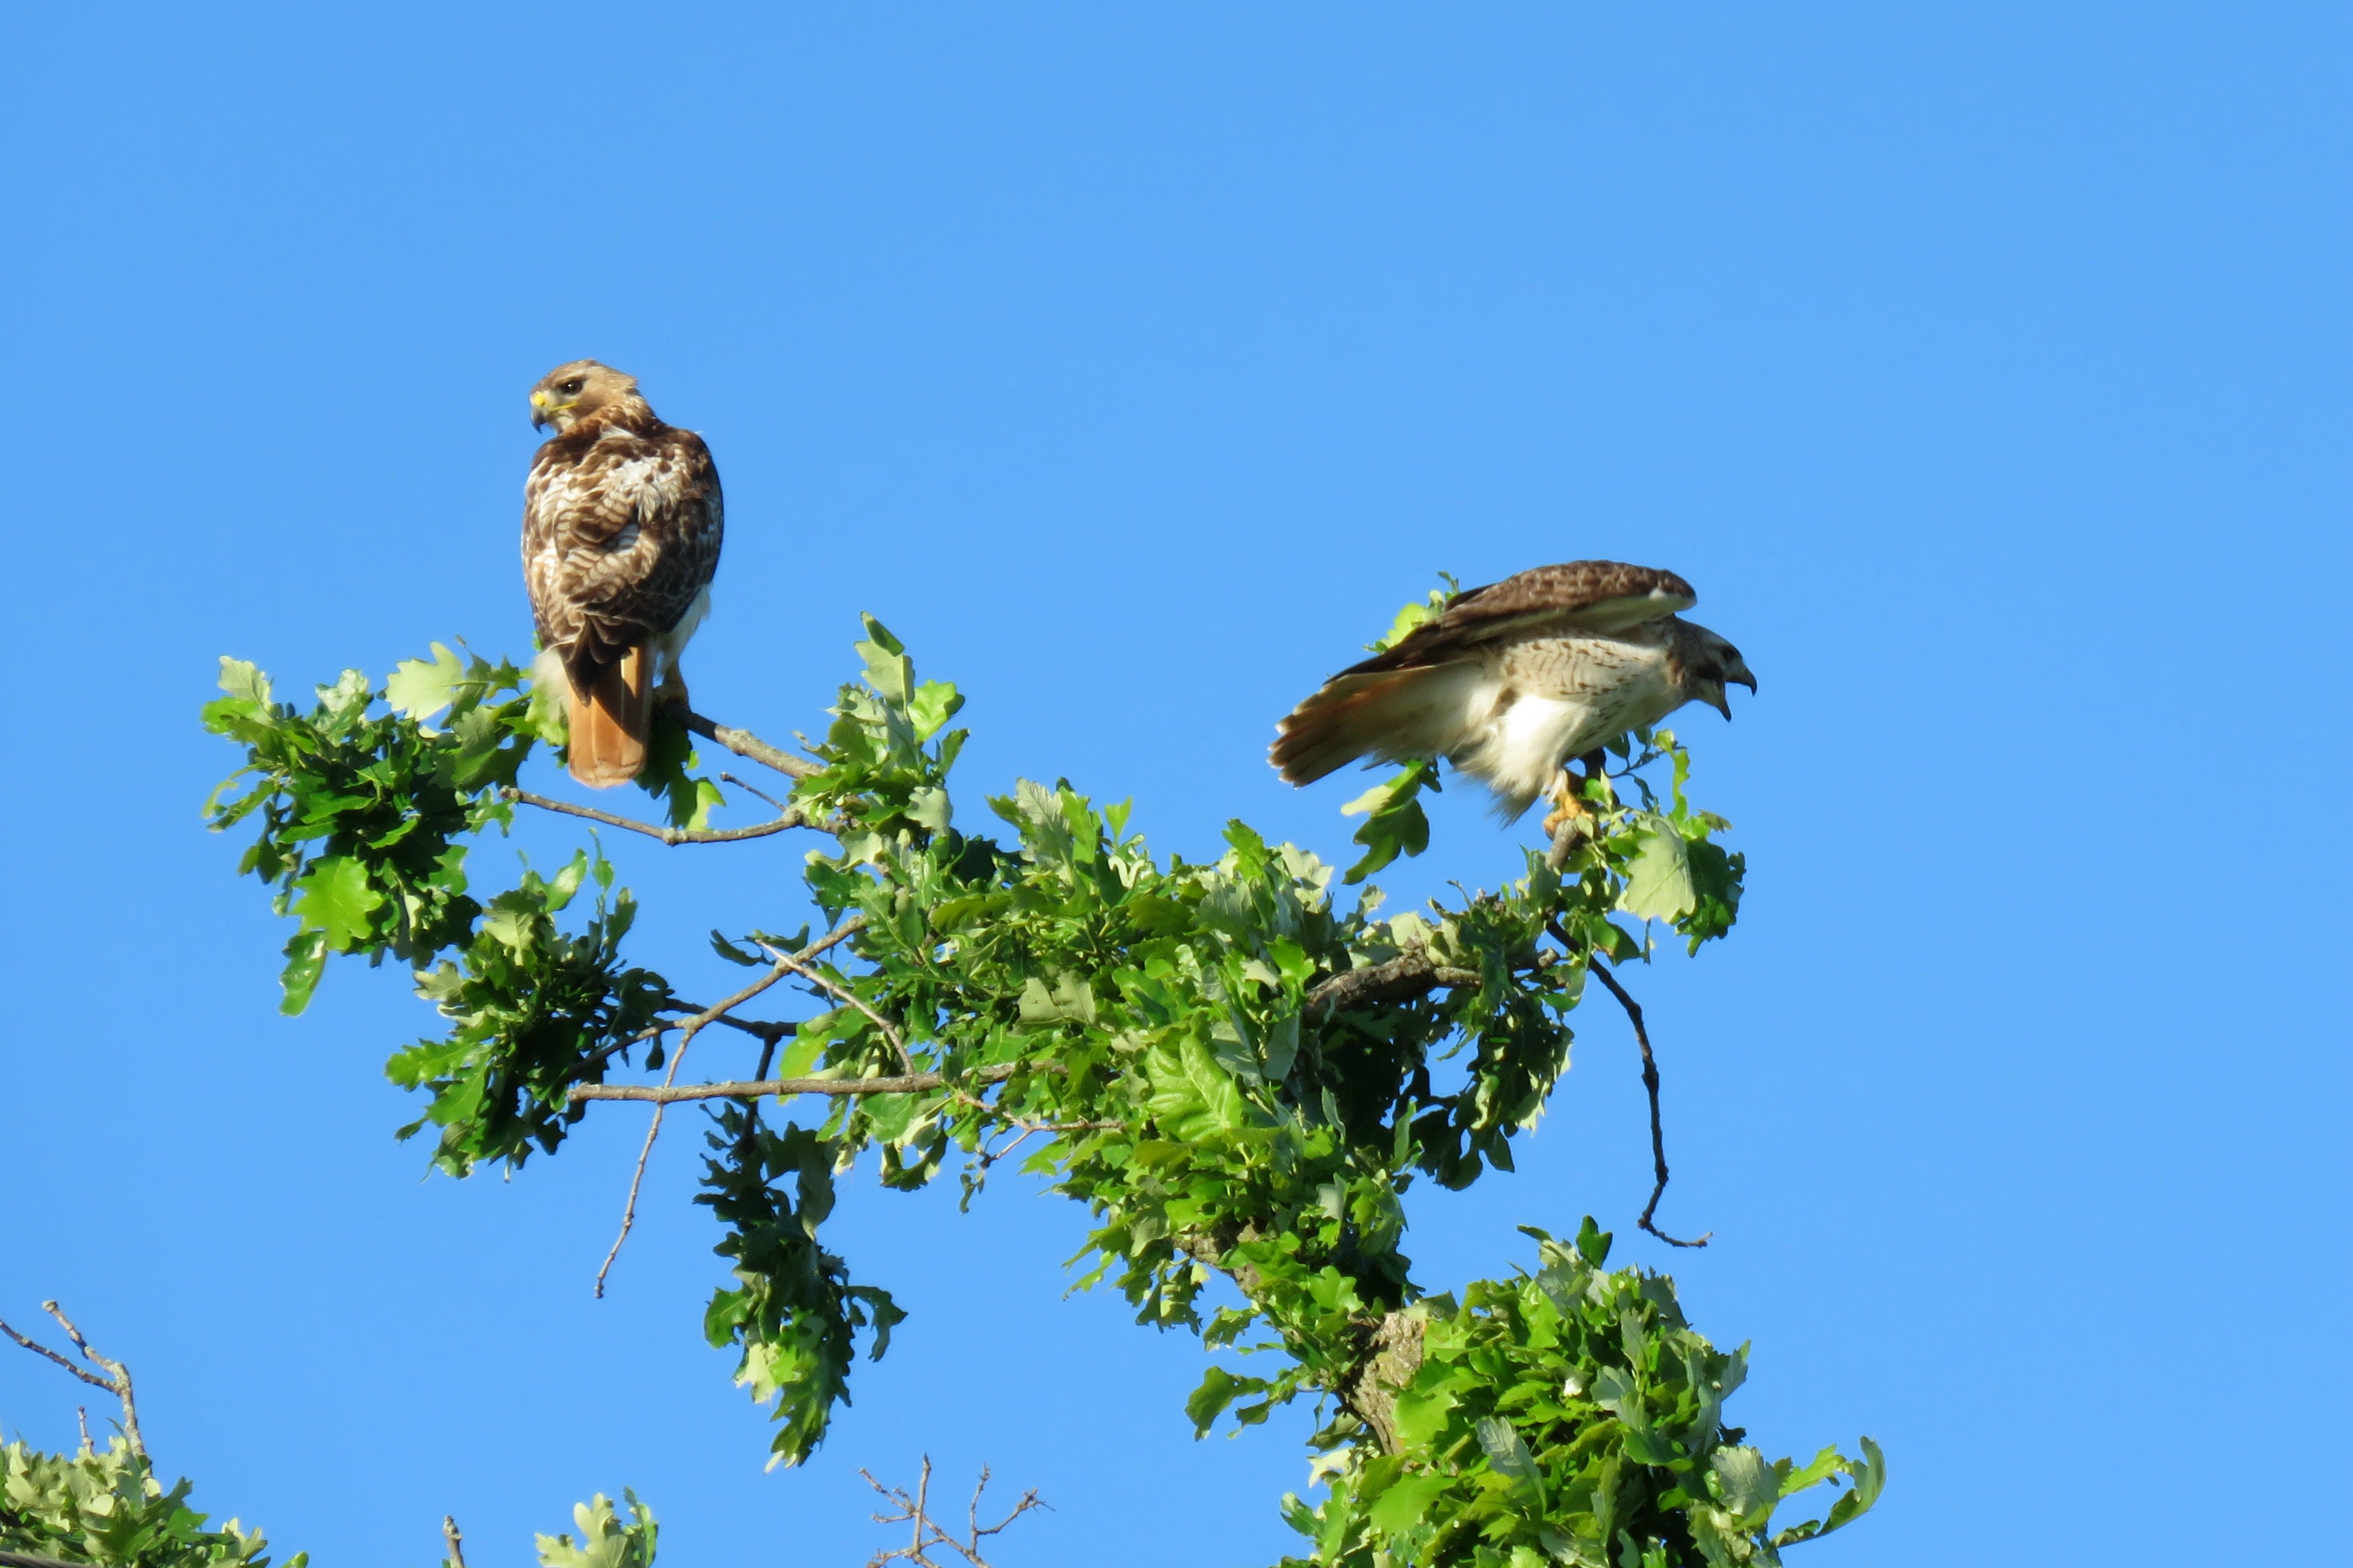 Chicago outdoors: Red-tailed hawk family and admiral butterflies